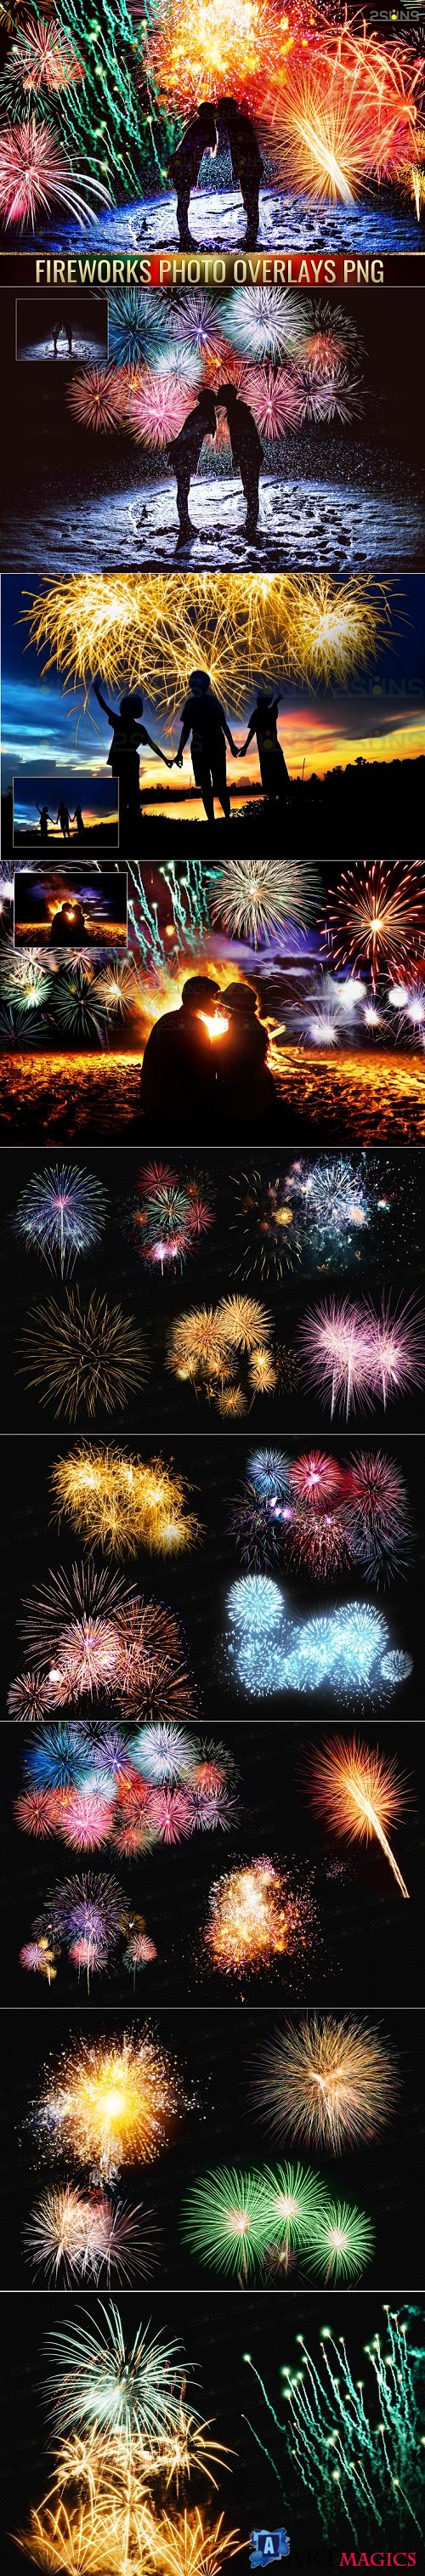 Holiday fireworks overlays christmas png sparkle photoshop  - 374437